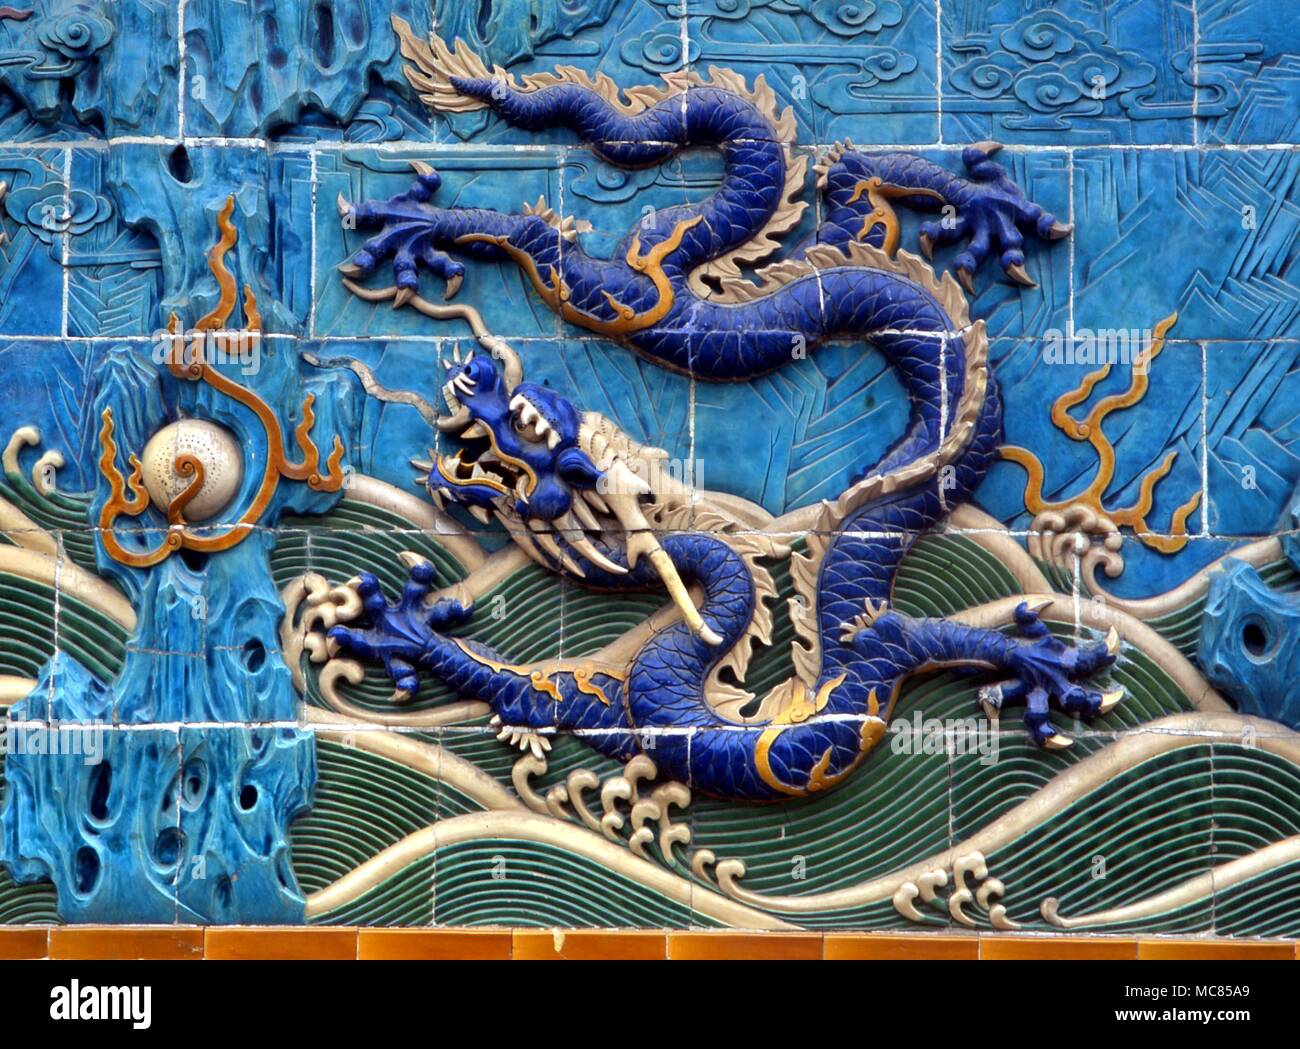 One of the nine imperial dragons on the Nine Dragon Screen (Jiu Lung Bi) of the Ming Dynasty. The screen is located in Bei Hai Park, Beijing, and is one of the most famous landmarks in the city. Stock Photo